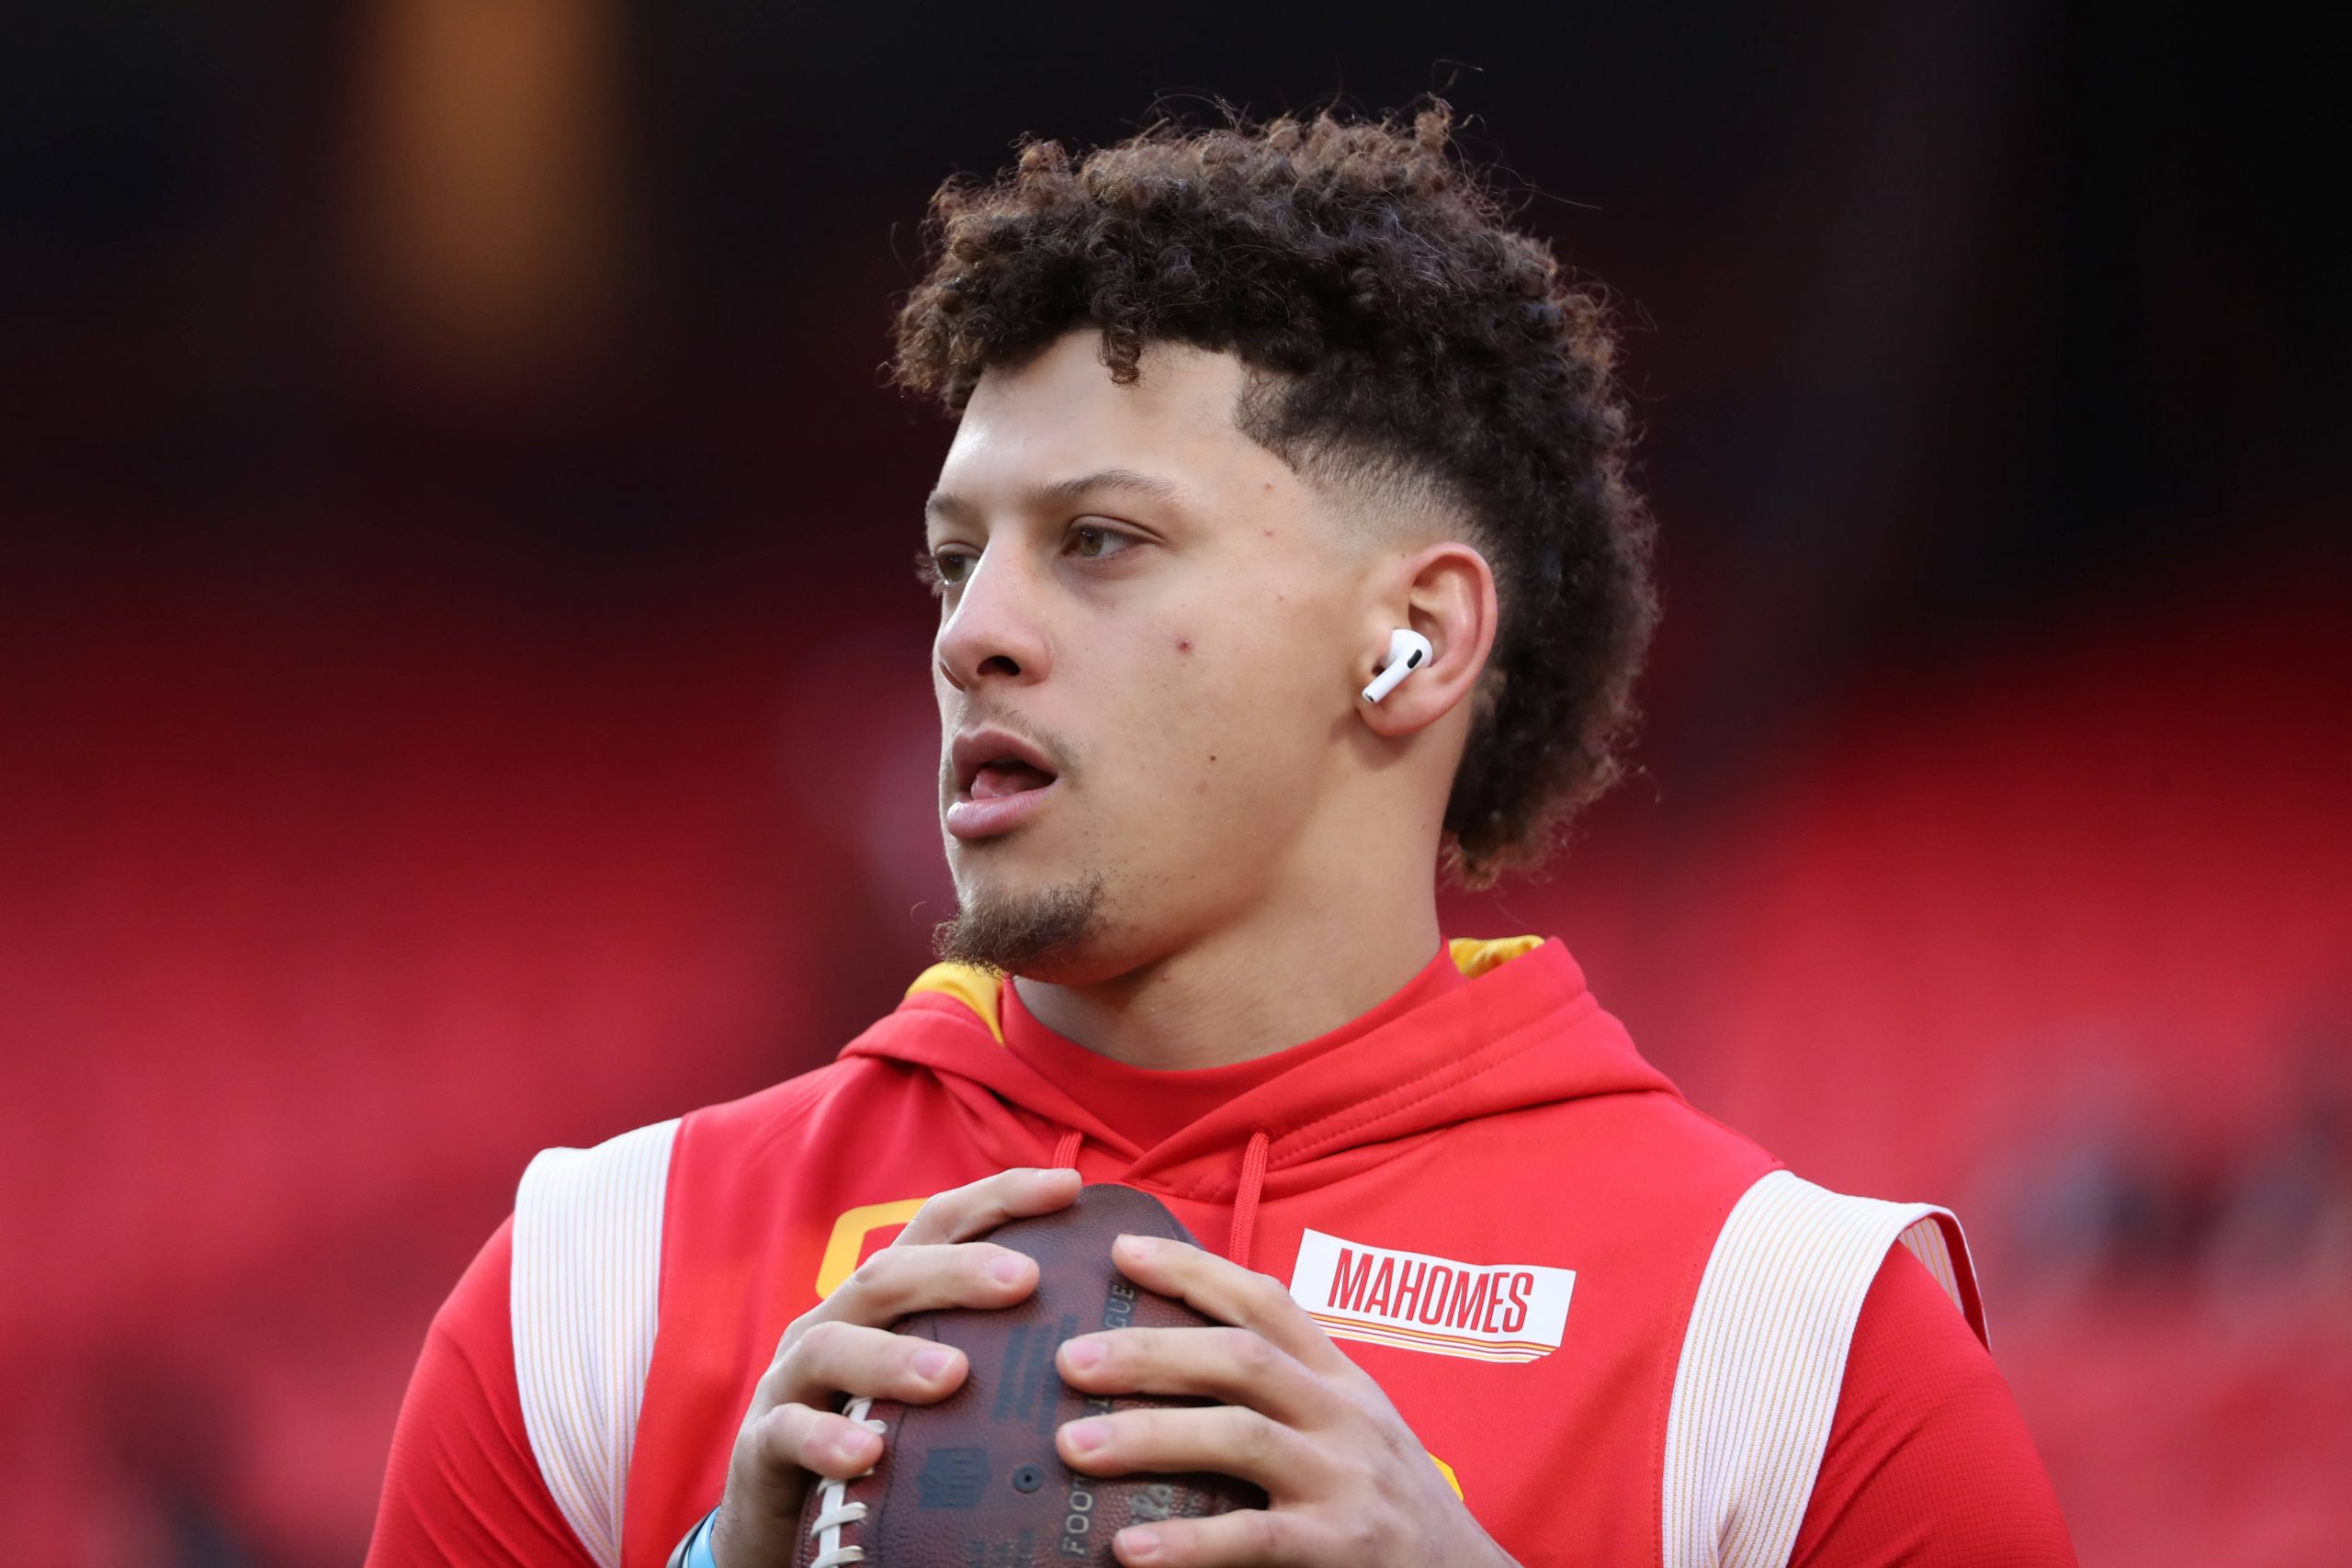 KANSAS CITY, MO - JANUARY 21: Kansas City Chiefs quarterback Patrick Mahomes 15 before an AFC divisional playoff game between the Jacksonville Jaguars and Kansas City Chiefs on January 21, 2023 at GEHA Field at Arrowhead Stadium in Kansas City, MO. Photo by Scott Winters/Icon Sportswire NFL, American Football Herren, USA JAN 21 AFC Divisional Playoffs - Jaguars at Chiefs Icon2301210059